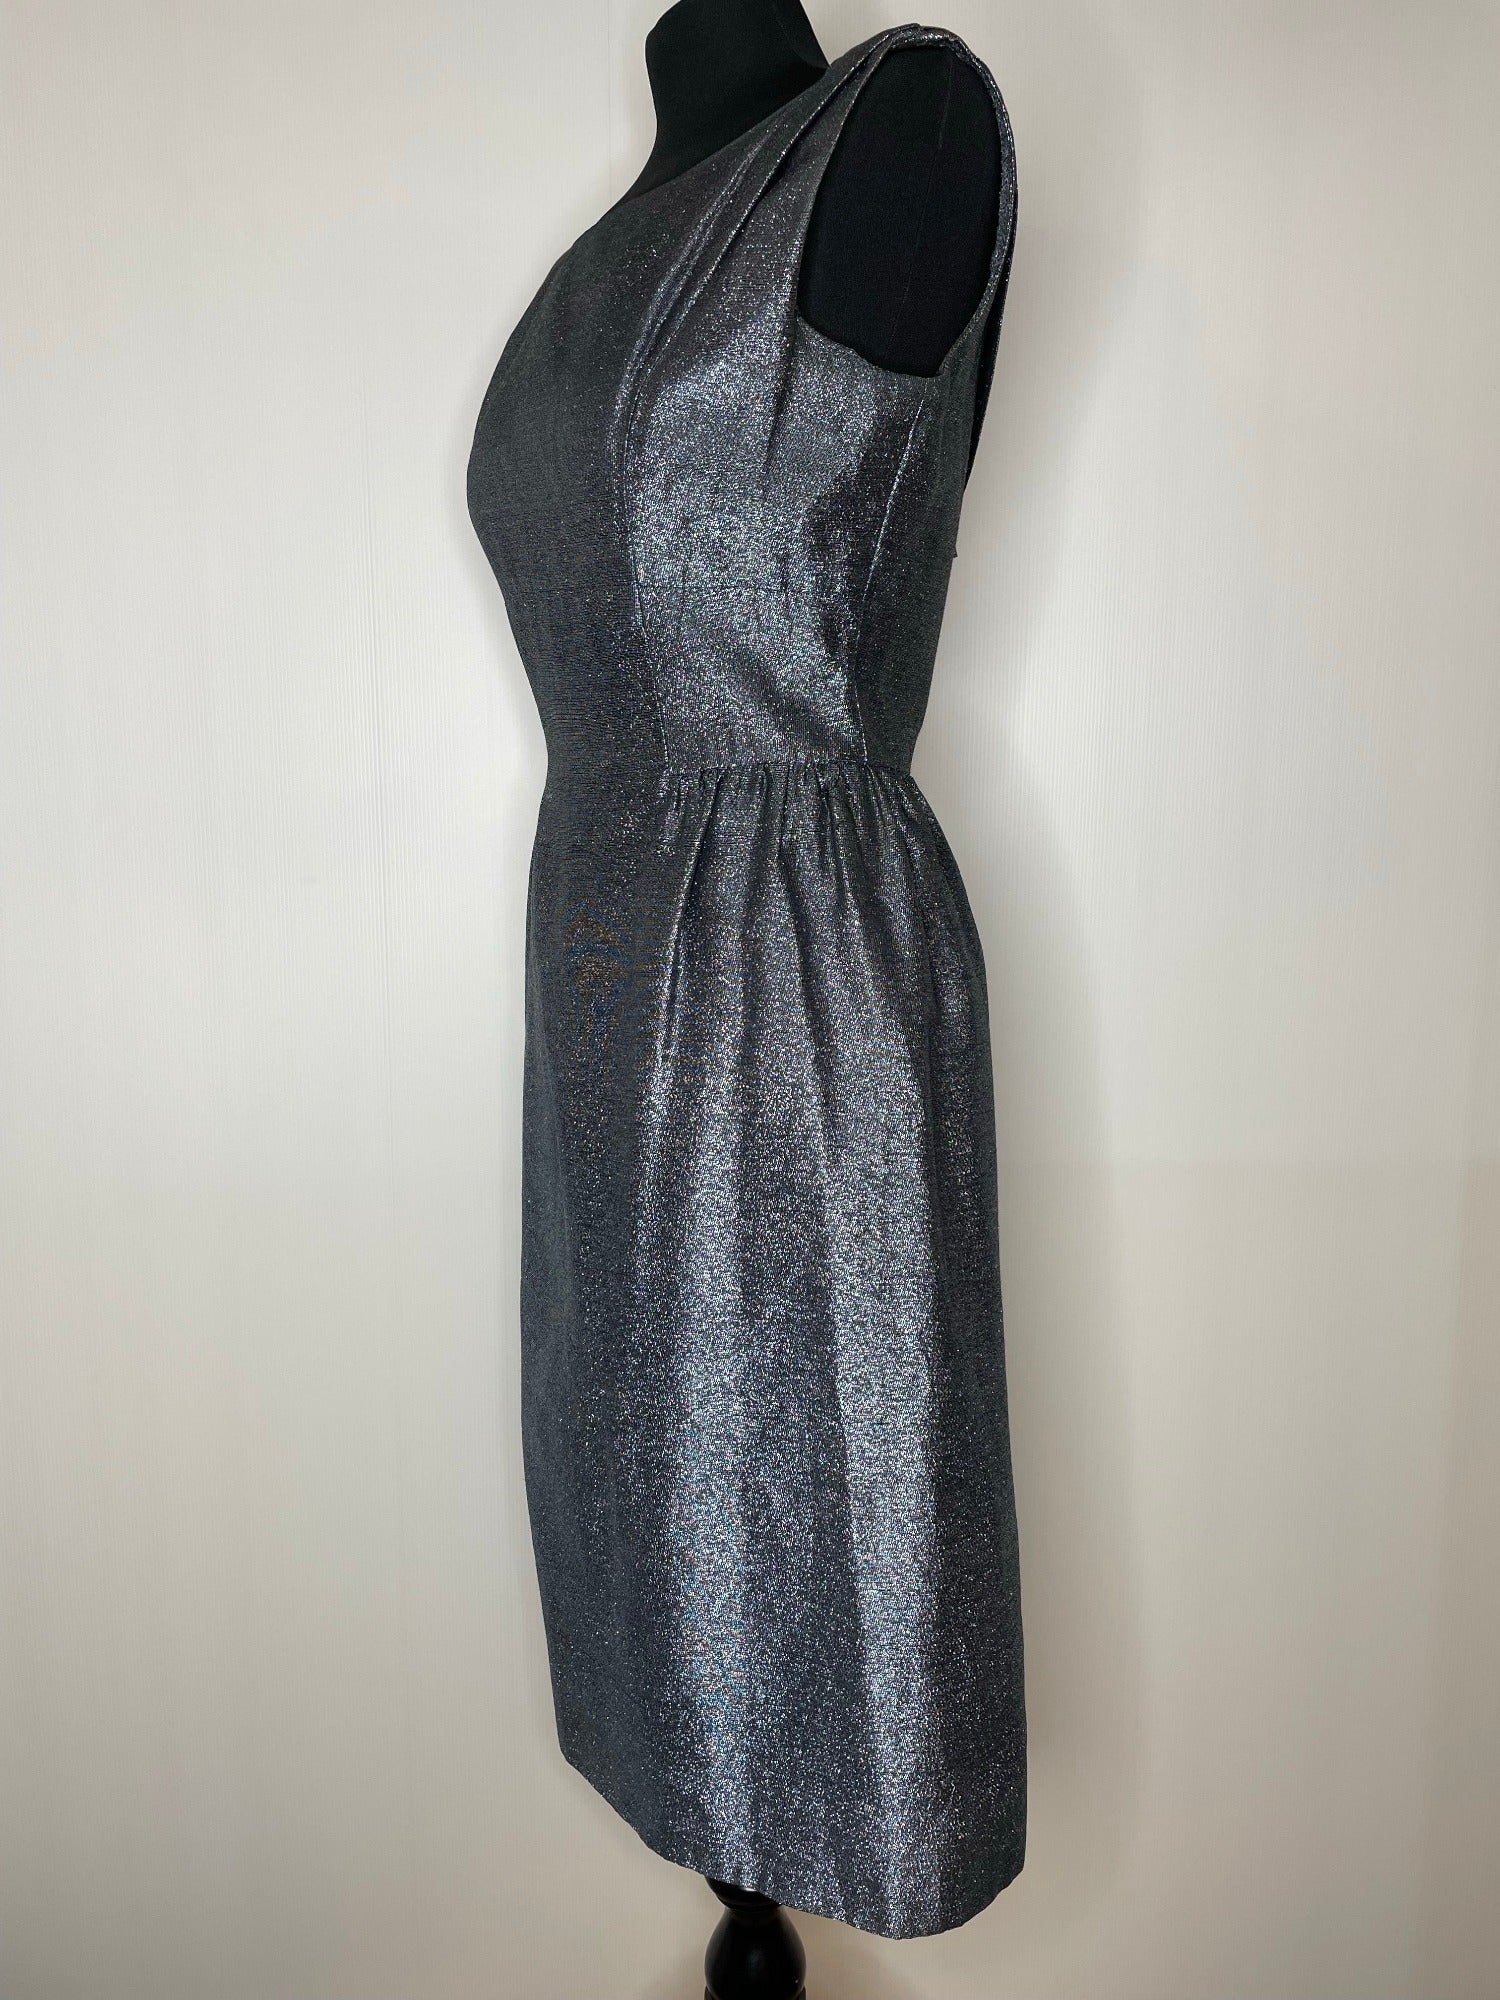 womens  wiggle dress  vintage  Urban Village Vintage  sparkly  silver  shift dress  shift  party  new year  lurex  grey  glitter  glam  festive  dress  crepe  christmas  bow  boat neck  60s  50s  1960s  1950s  10